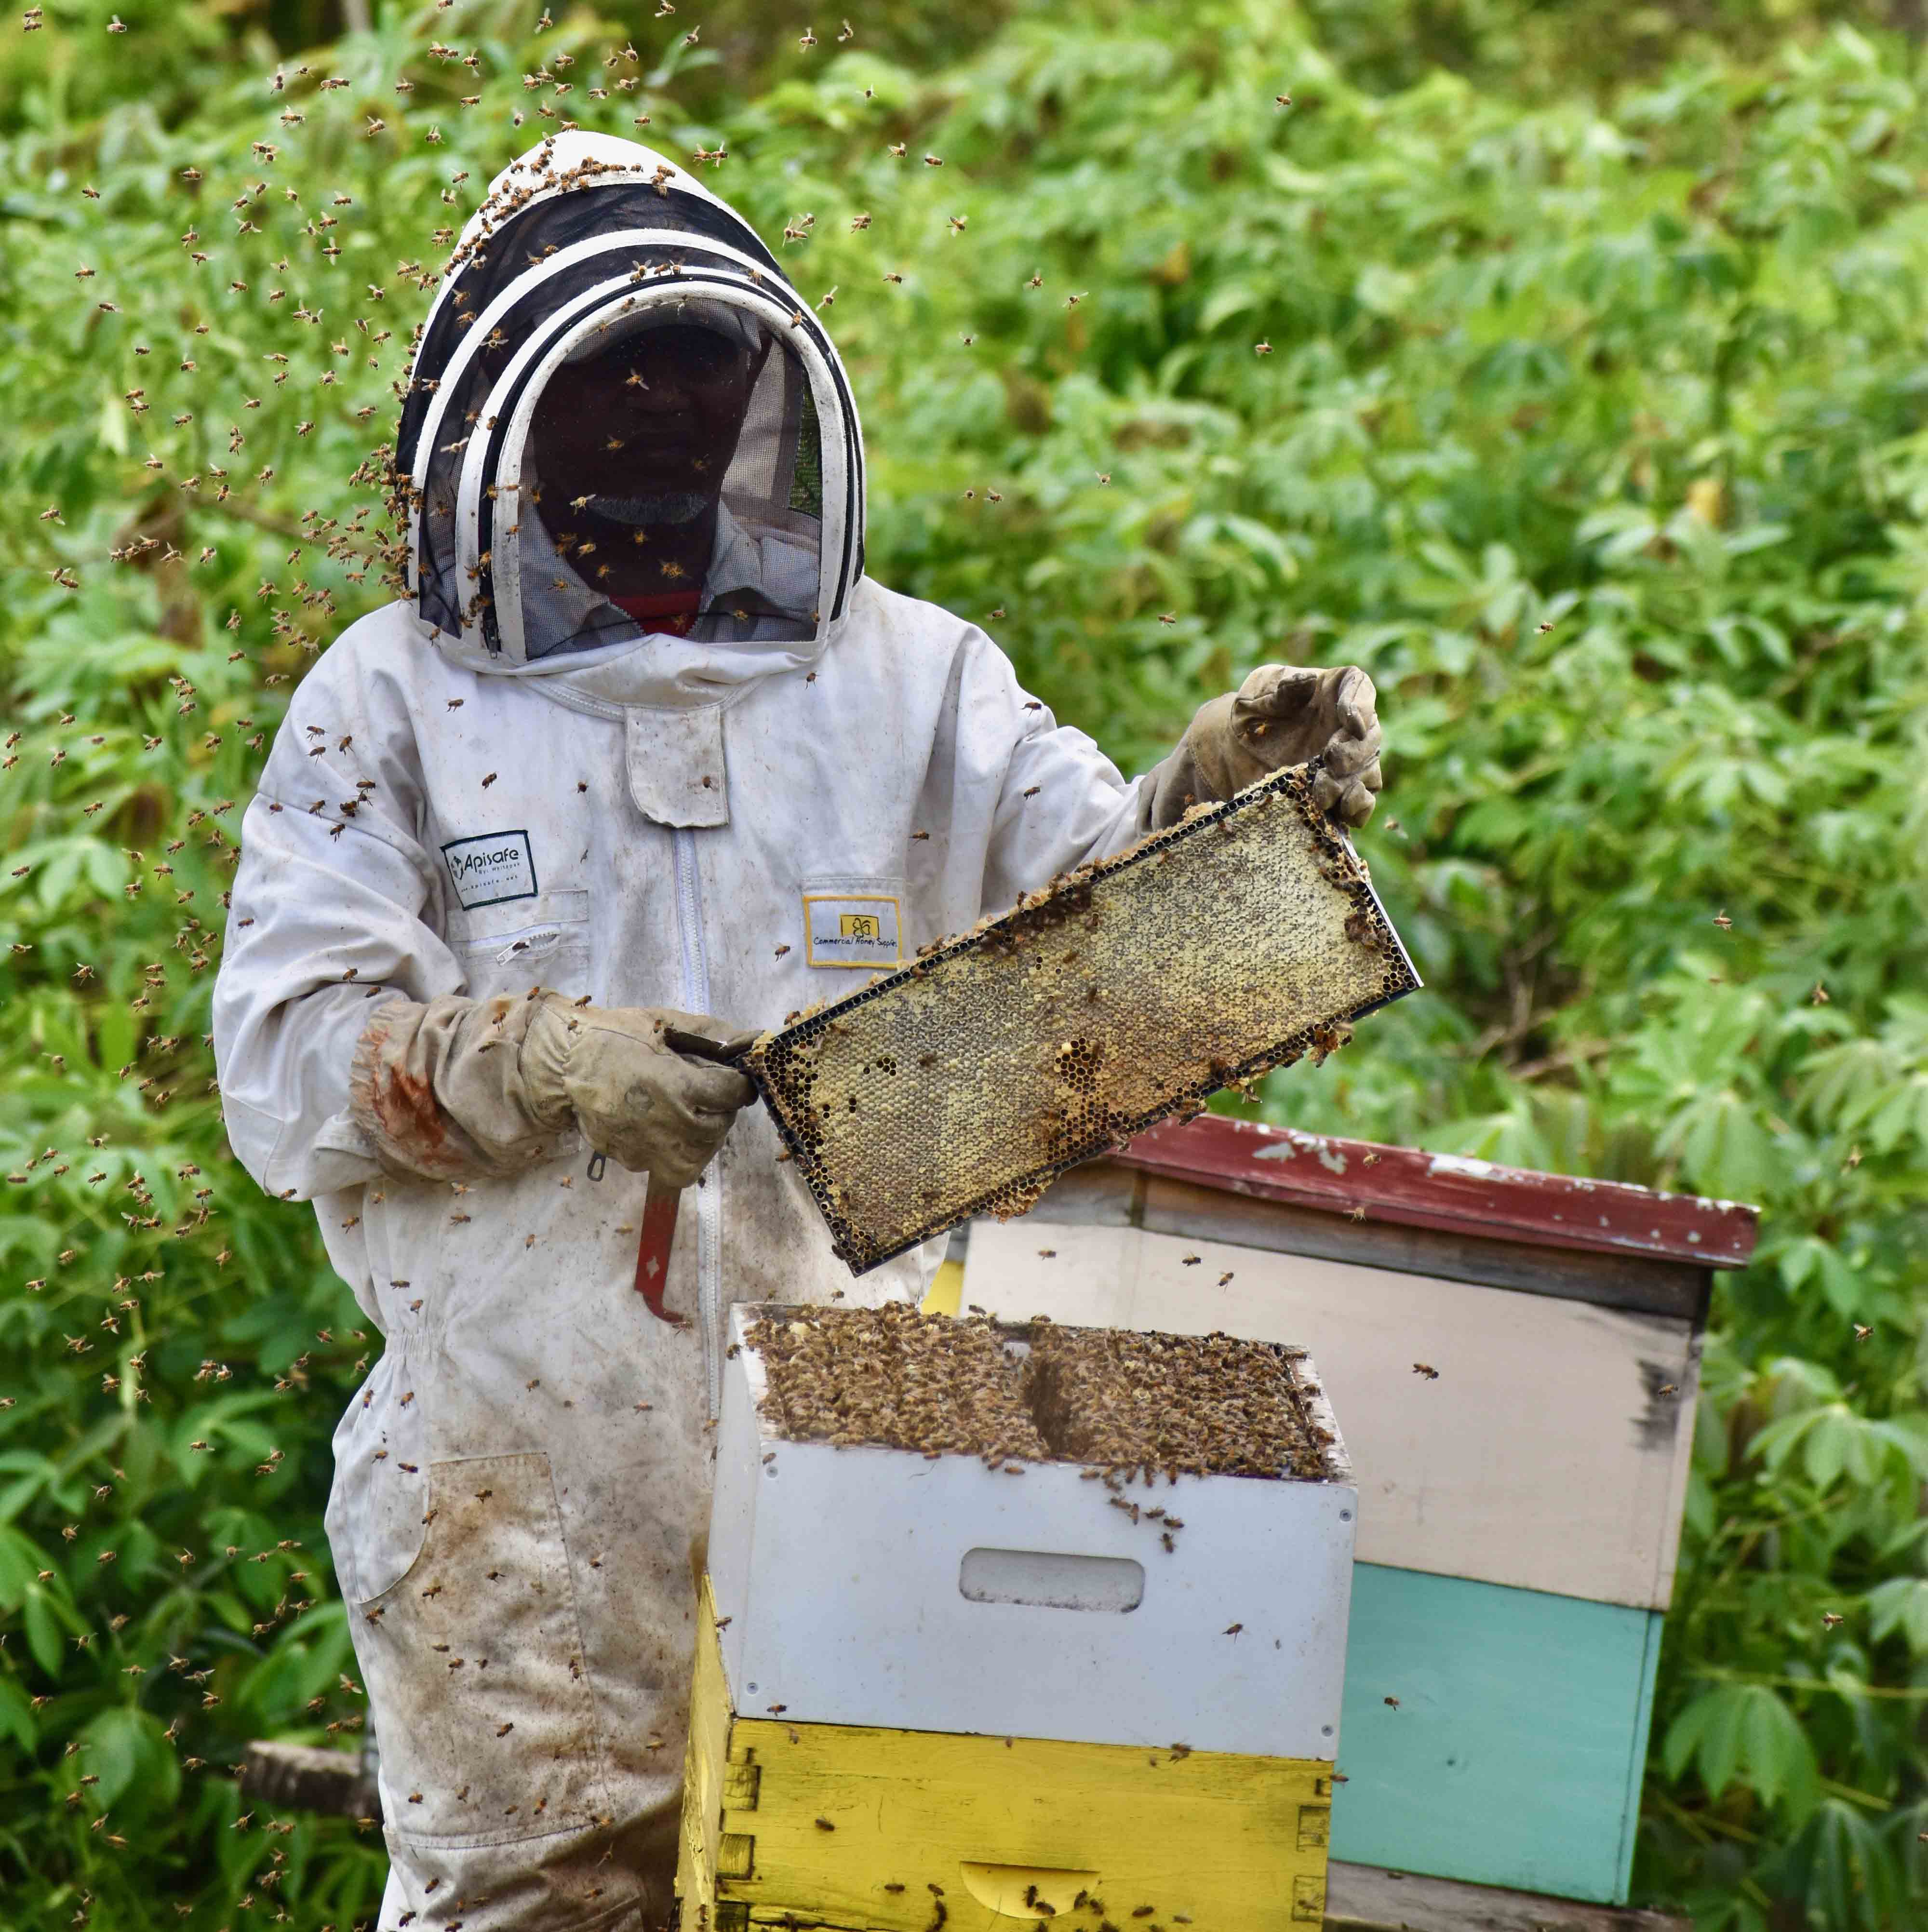 Fijian tilapia farmer Ms Katarina Baleisuva has ventured into beekeeping to diversify her farm income, with the support of mentoring and business skills training through an ACIAR supported-project. Photo: Lorima Vueti.